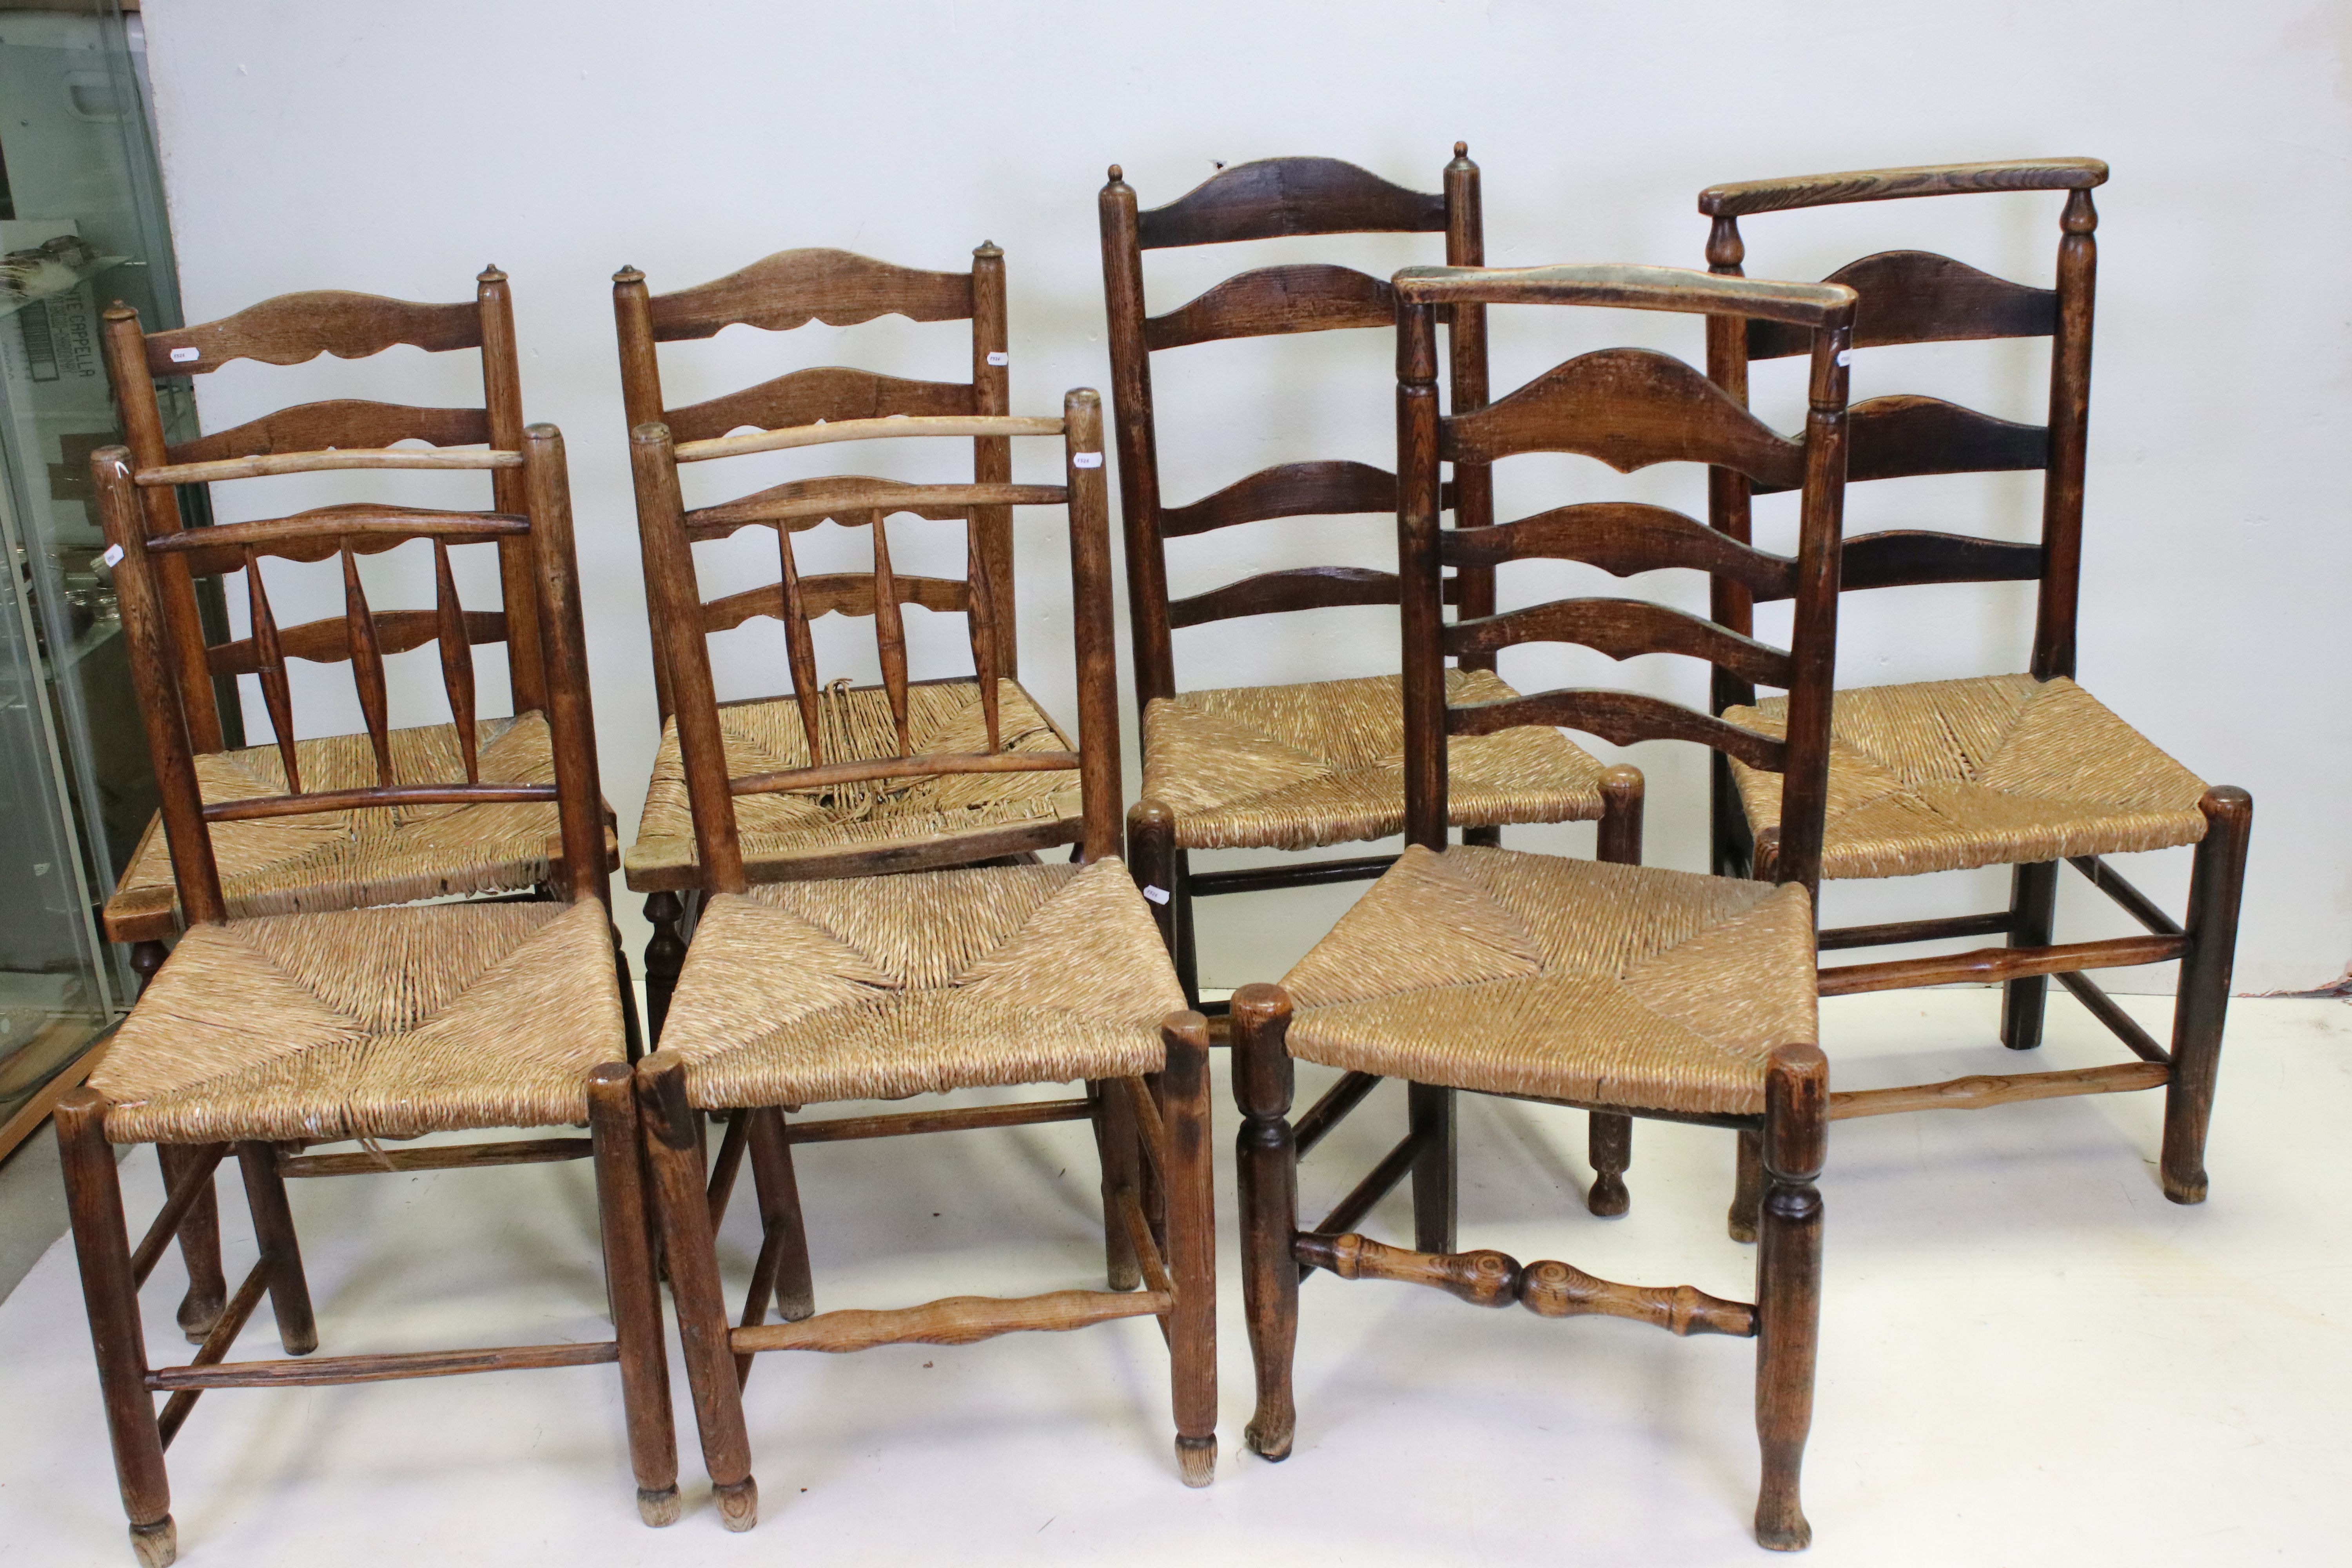 Three Pairs of Oak Ladder Back Chairs with Rush Seats together with one other similar chair